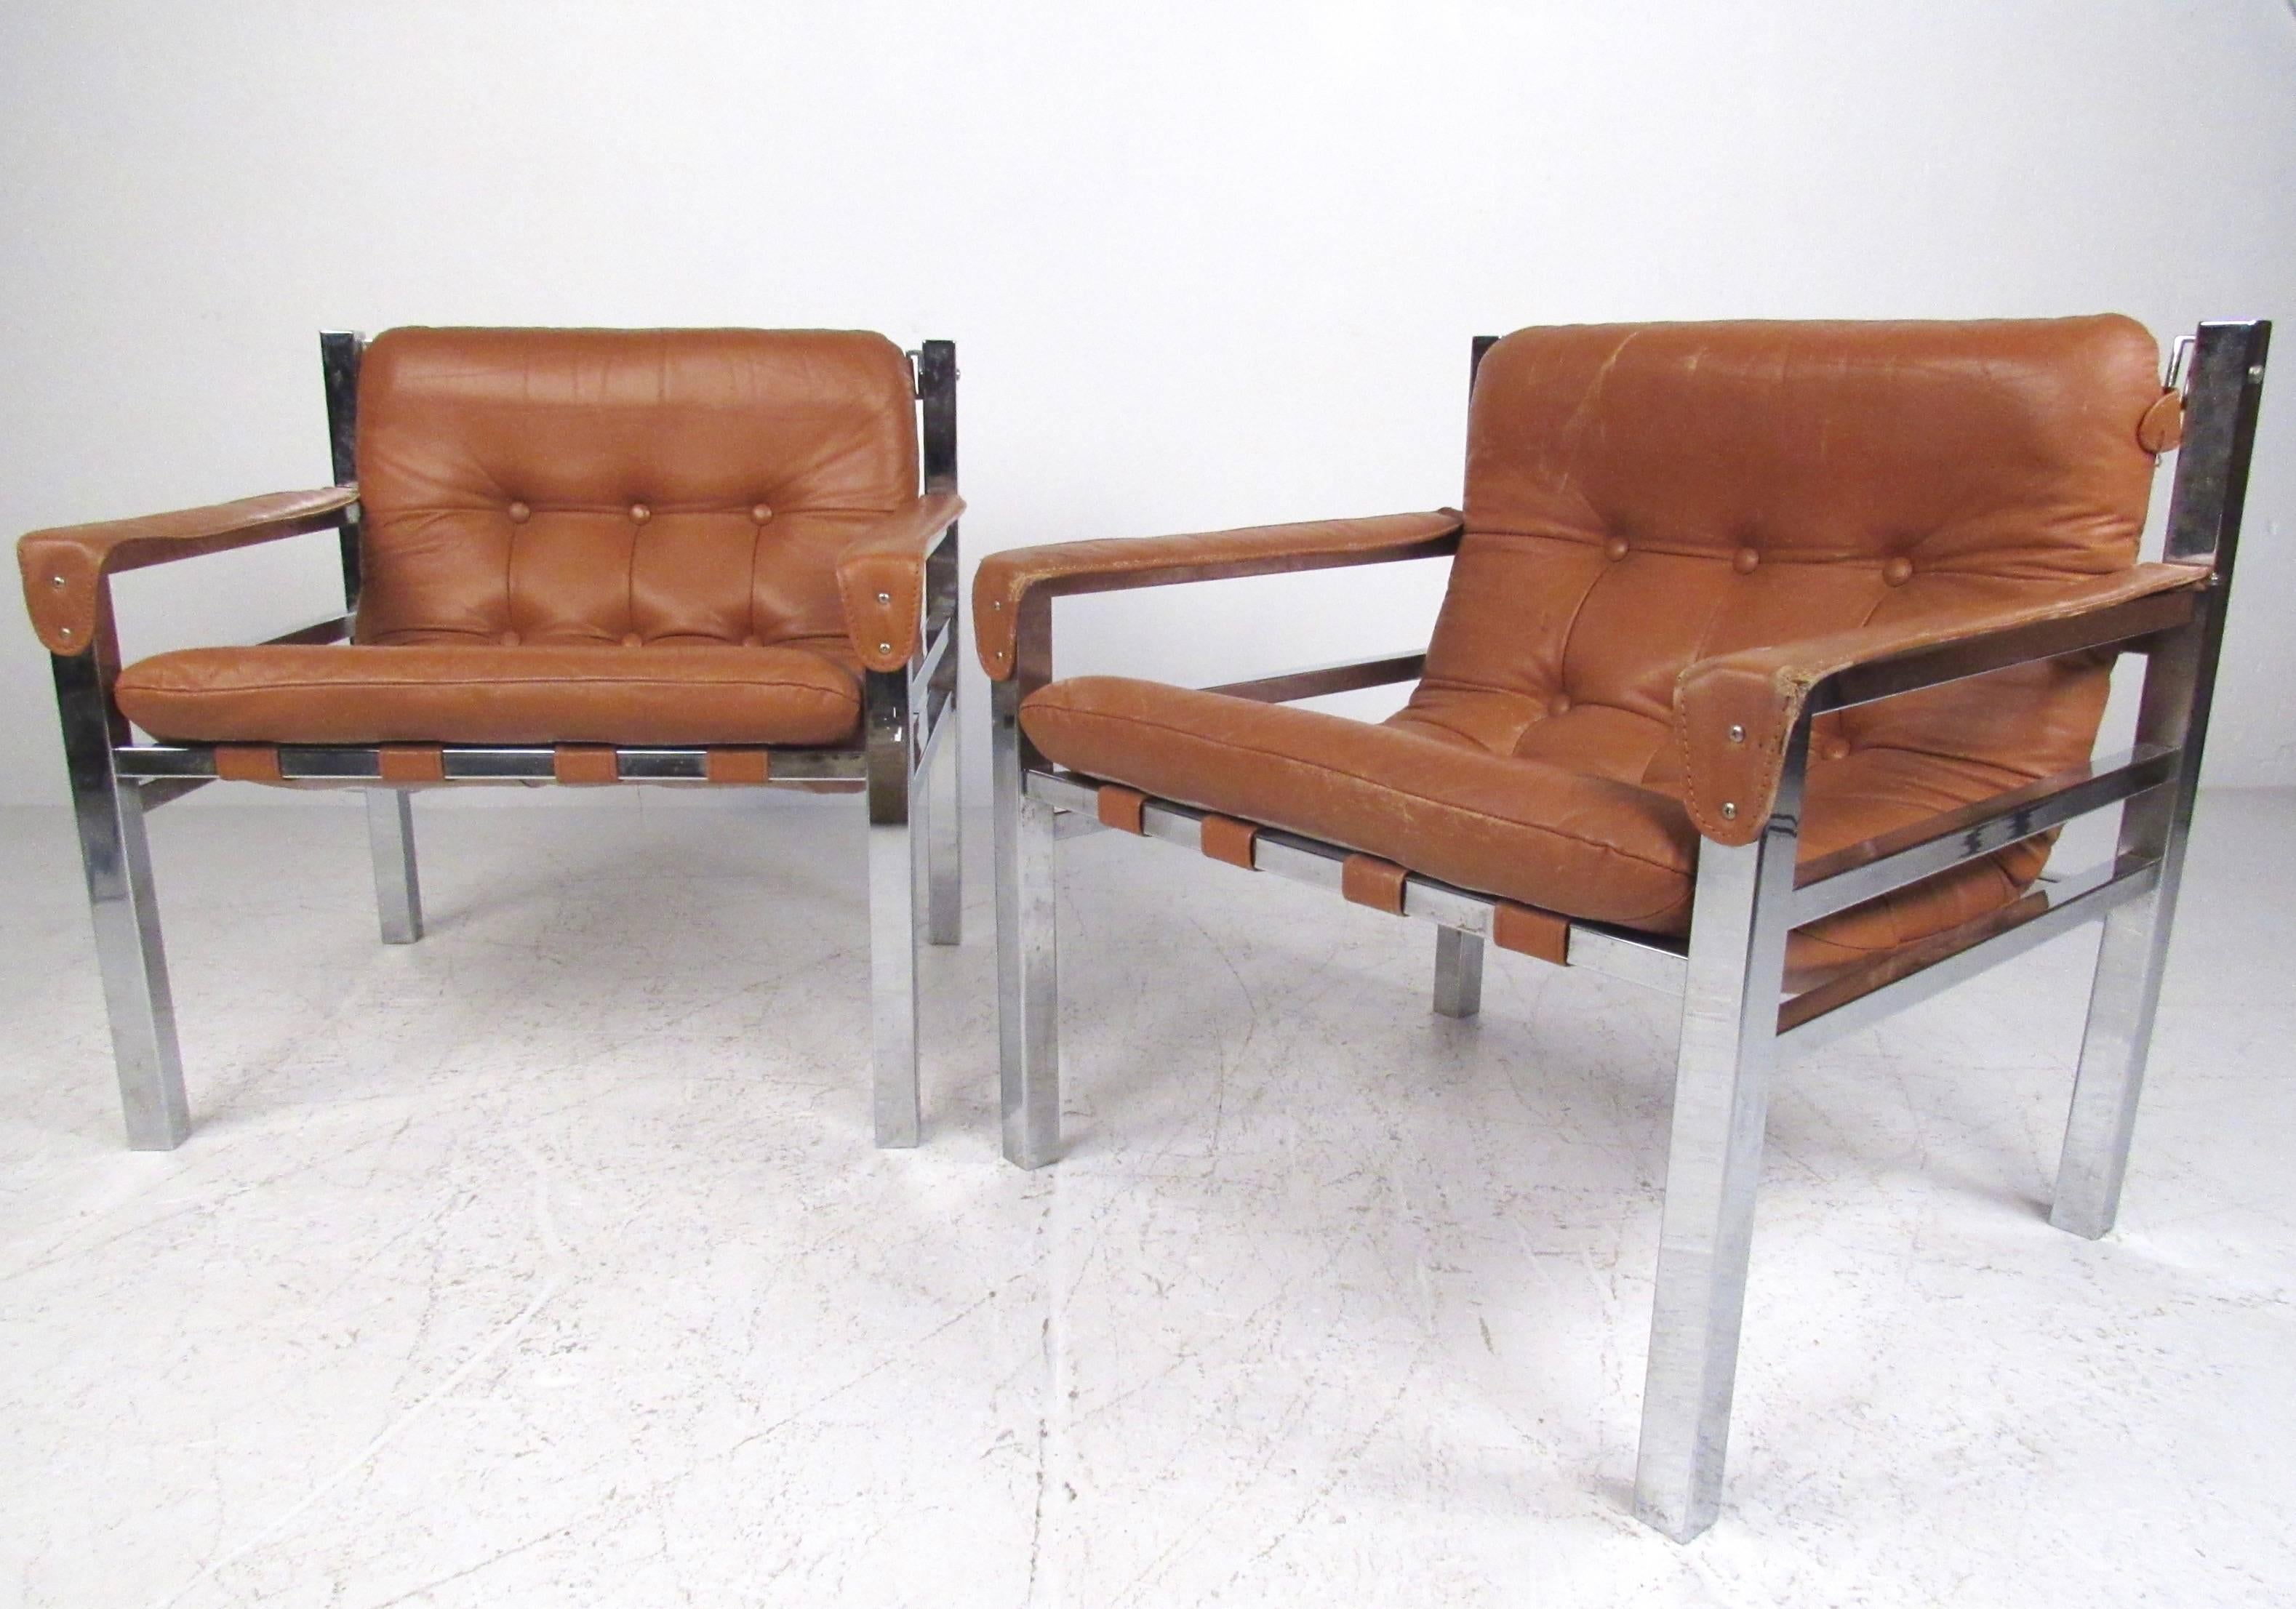 This stylish pair of Mid-Century armchairs feature tufted leather sling seats set in chrome frames. Unique vintage style is evident in this pair of comfortable 1970s lounge chairs. Please confirm item location (NY or NJ).